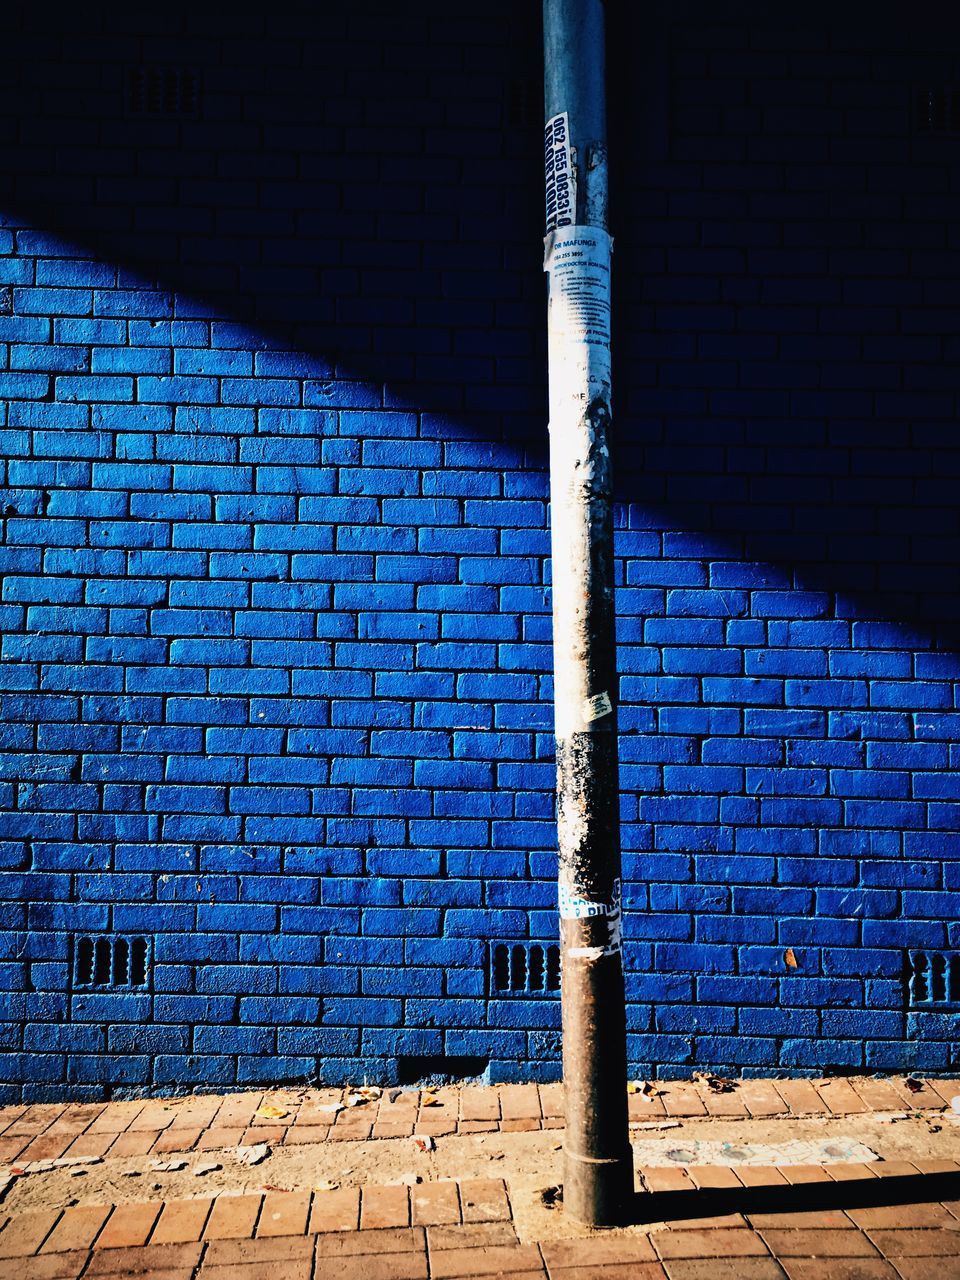 SHADOW OF BLUE WALL ON BRICK BUILDING